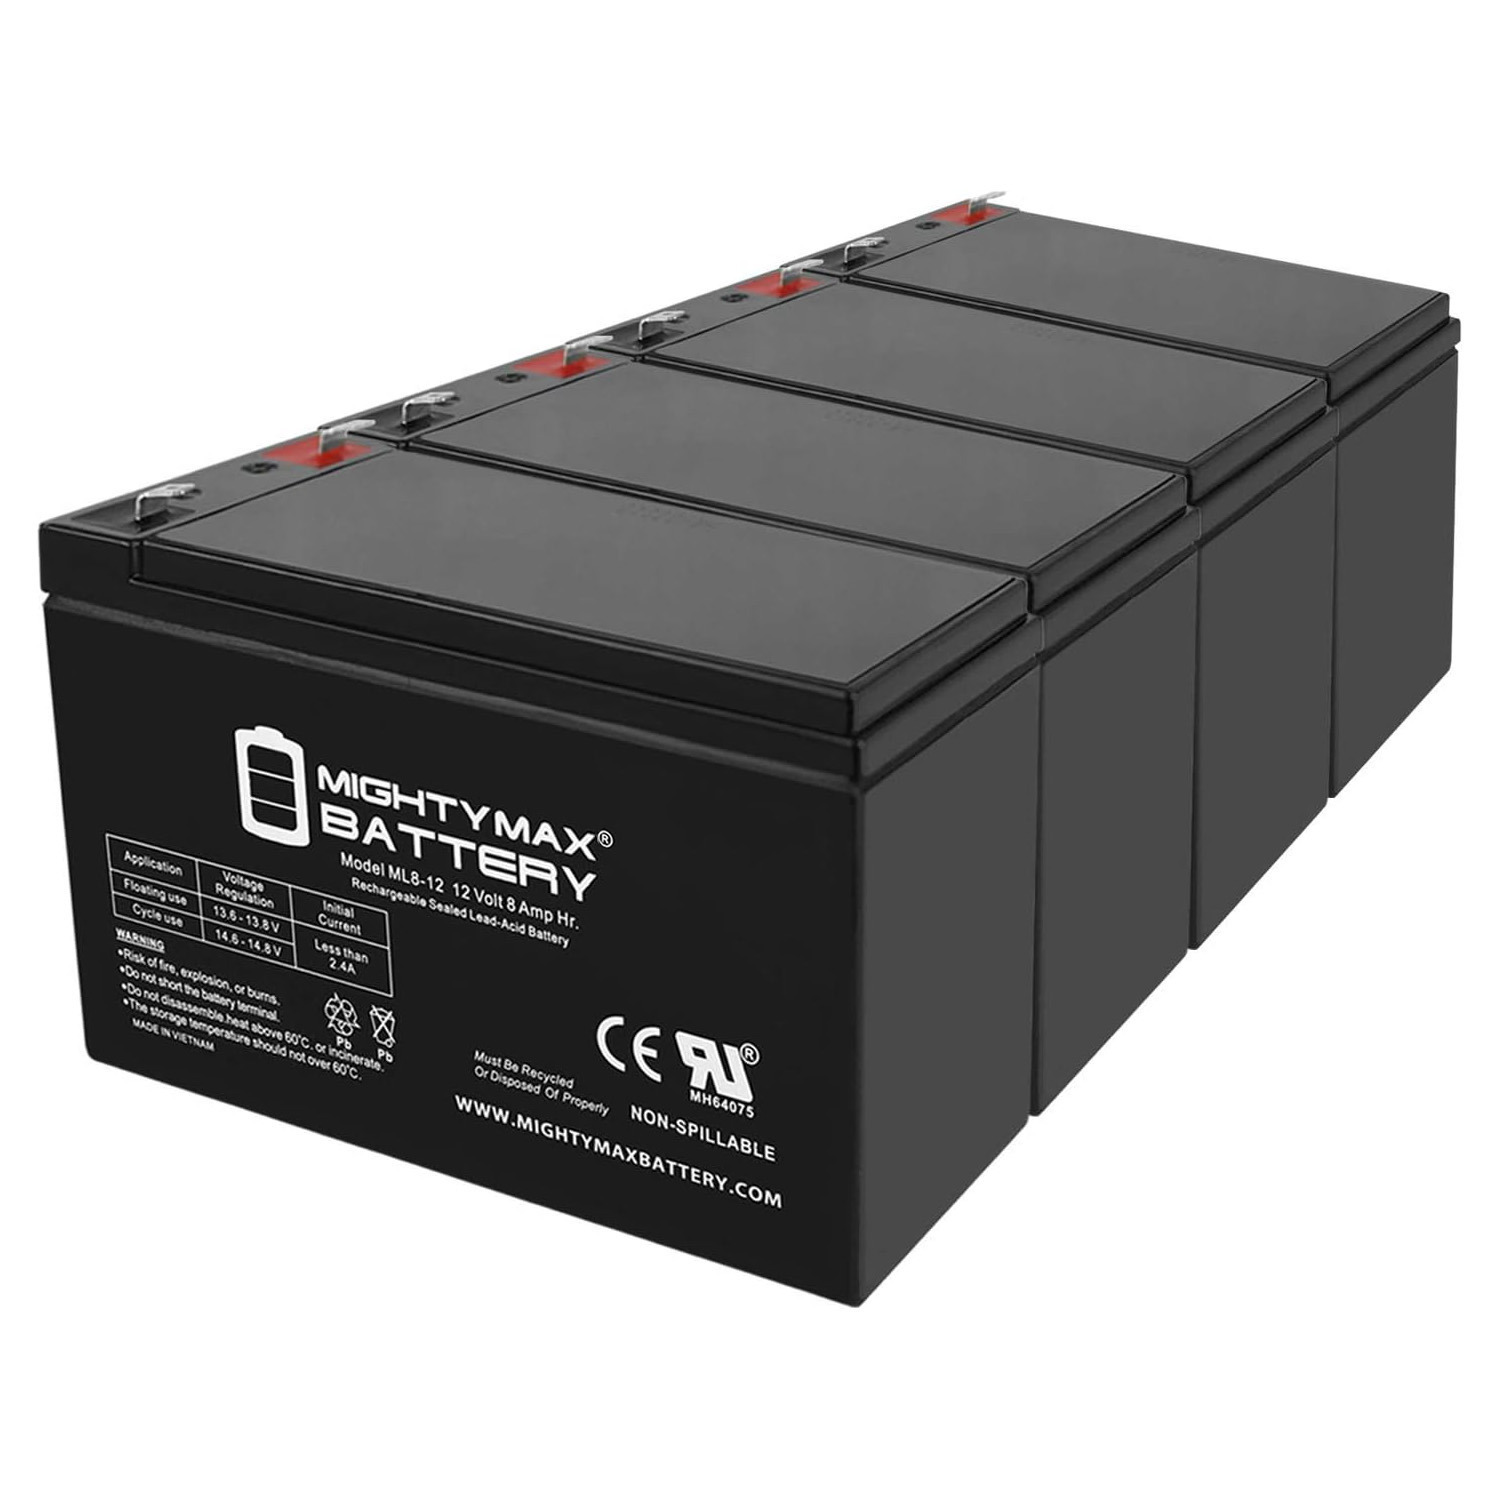 12V 8Ah Battery Replacement for Sola B510-600-U, B510-900-A - 4 Pack